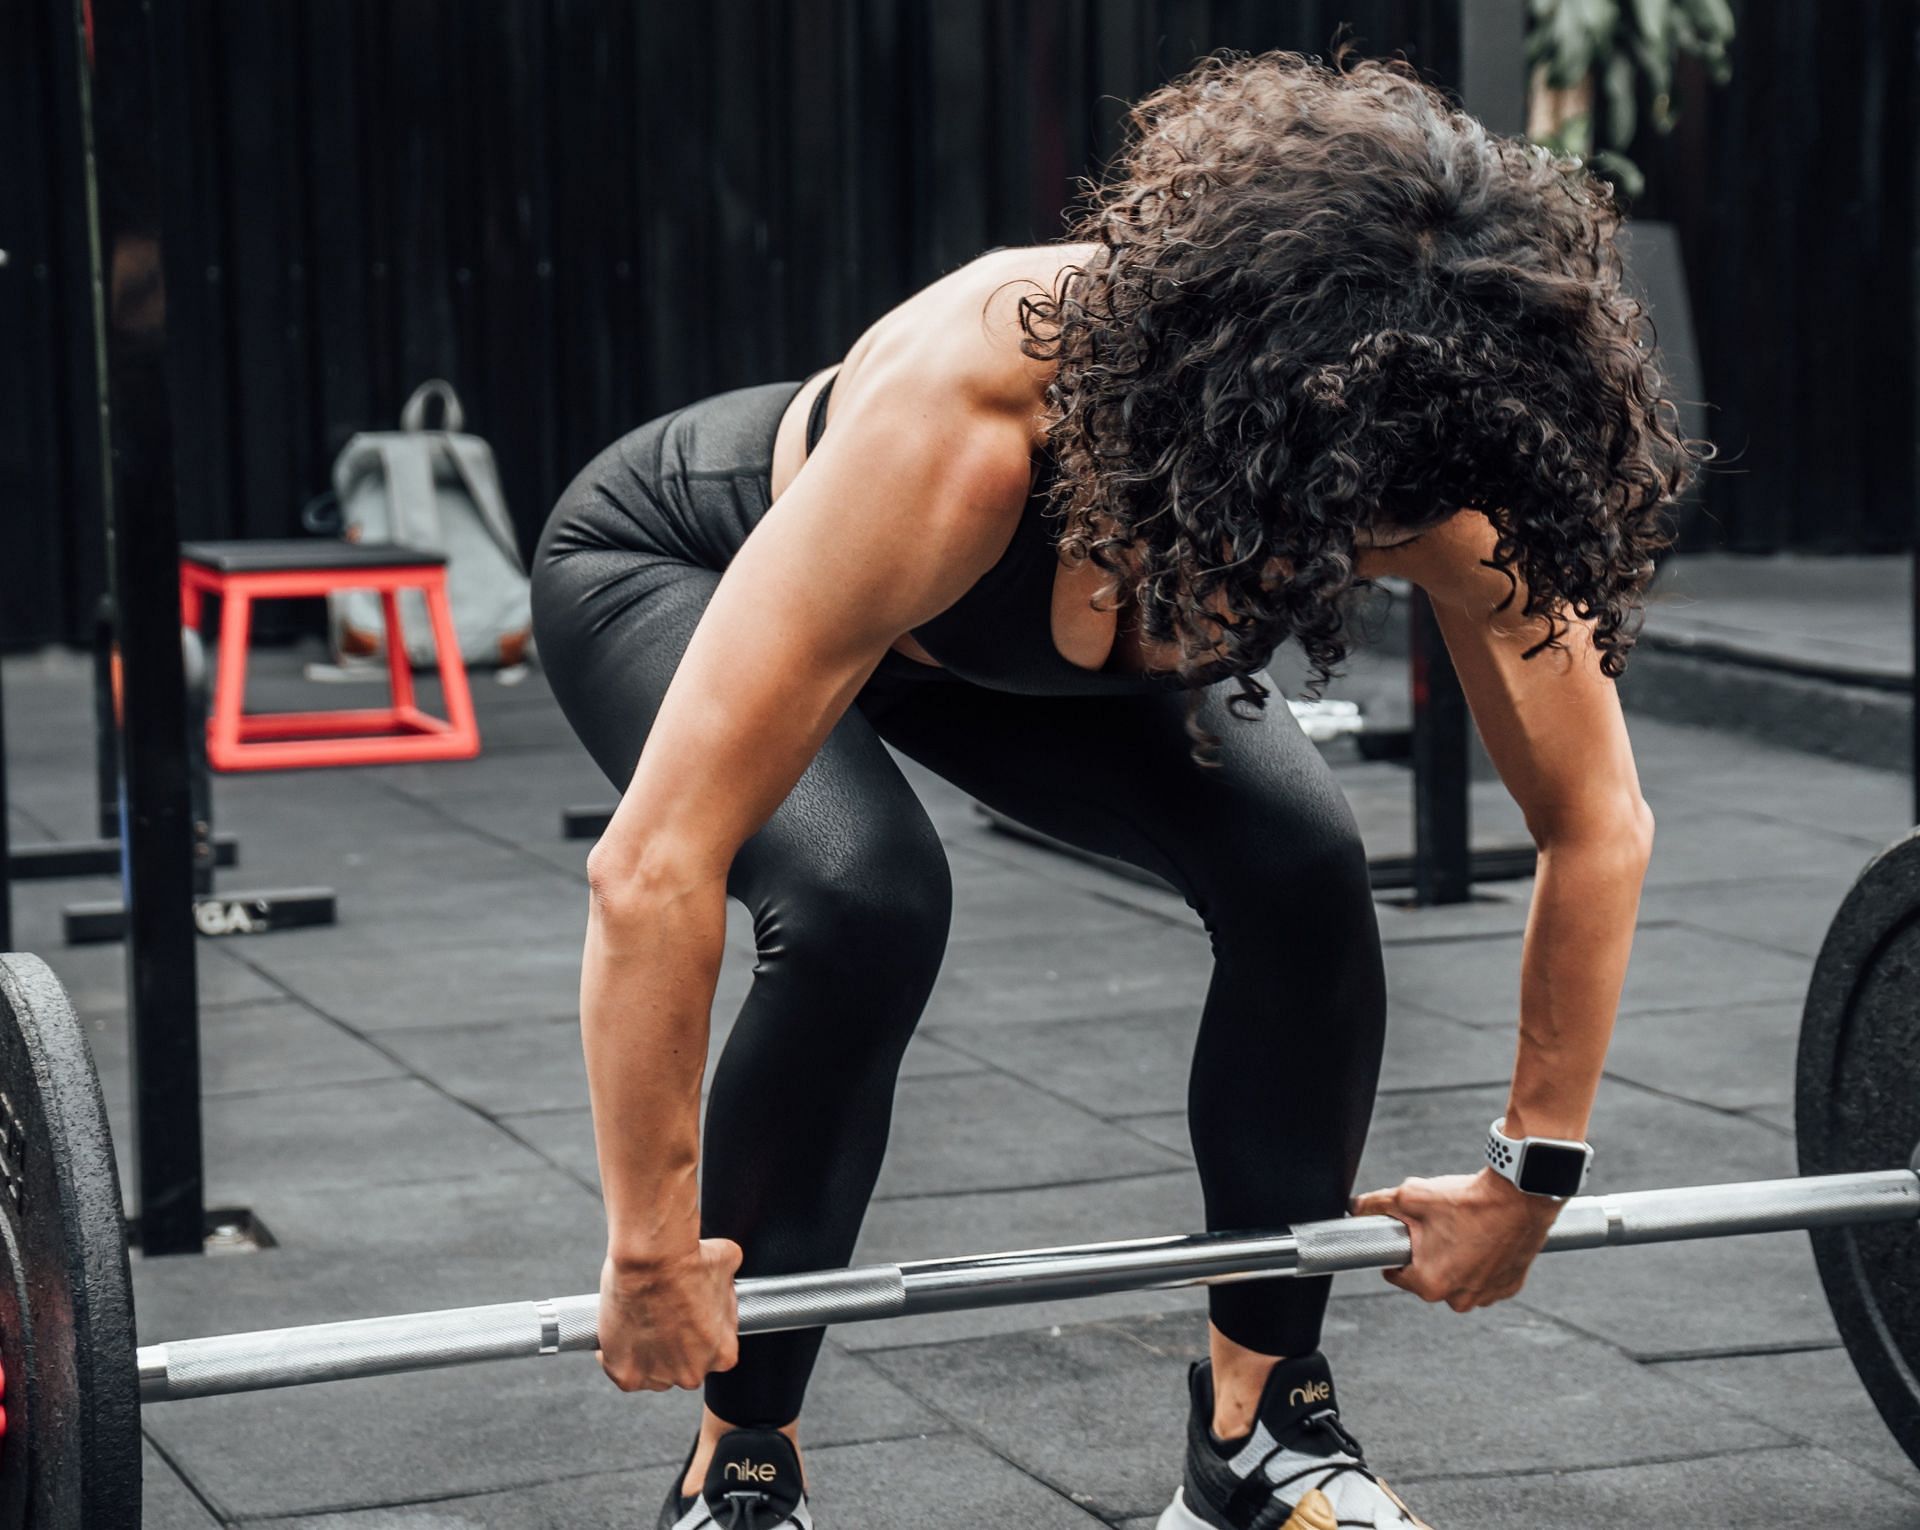 Due to the wider grip in snatch deadlift, it challenges and enhances grip strength. (Mike Gonzalez/Pexels)